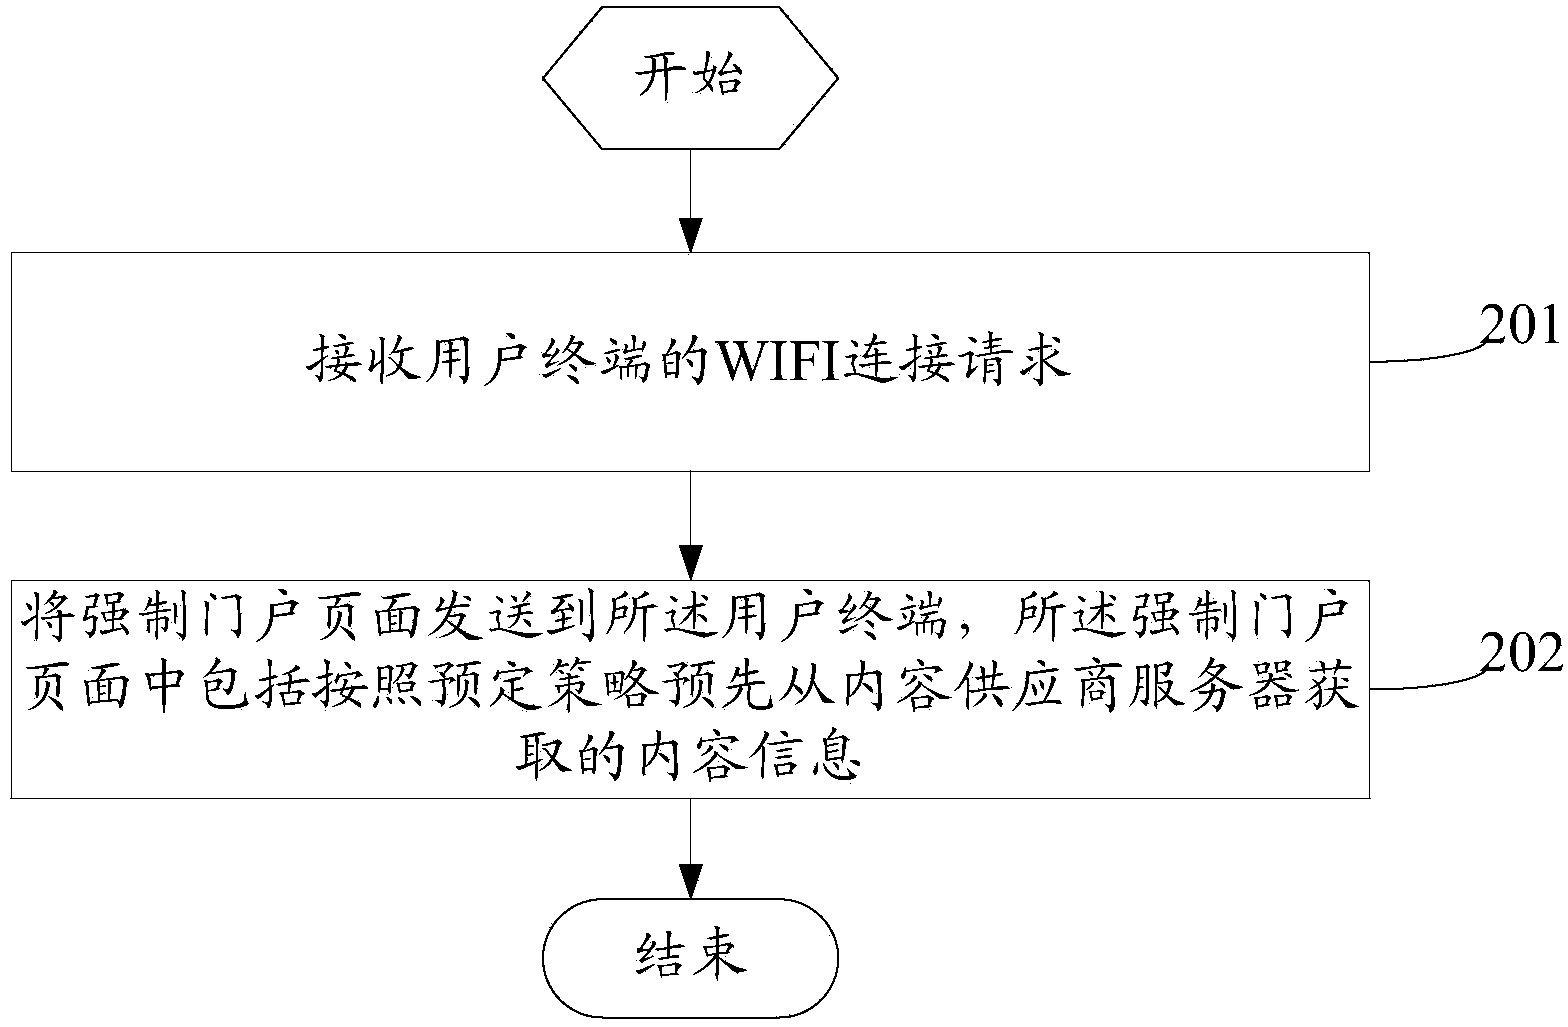 Content issuing device, method and system